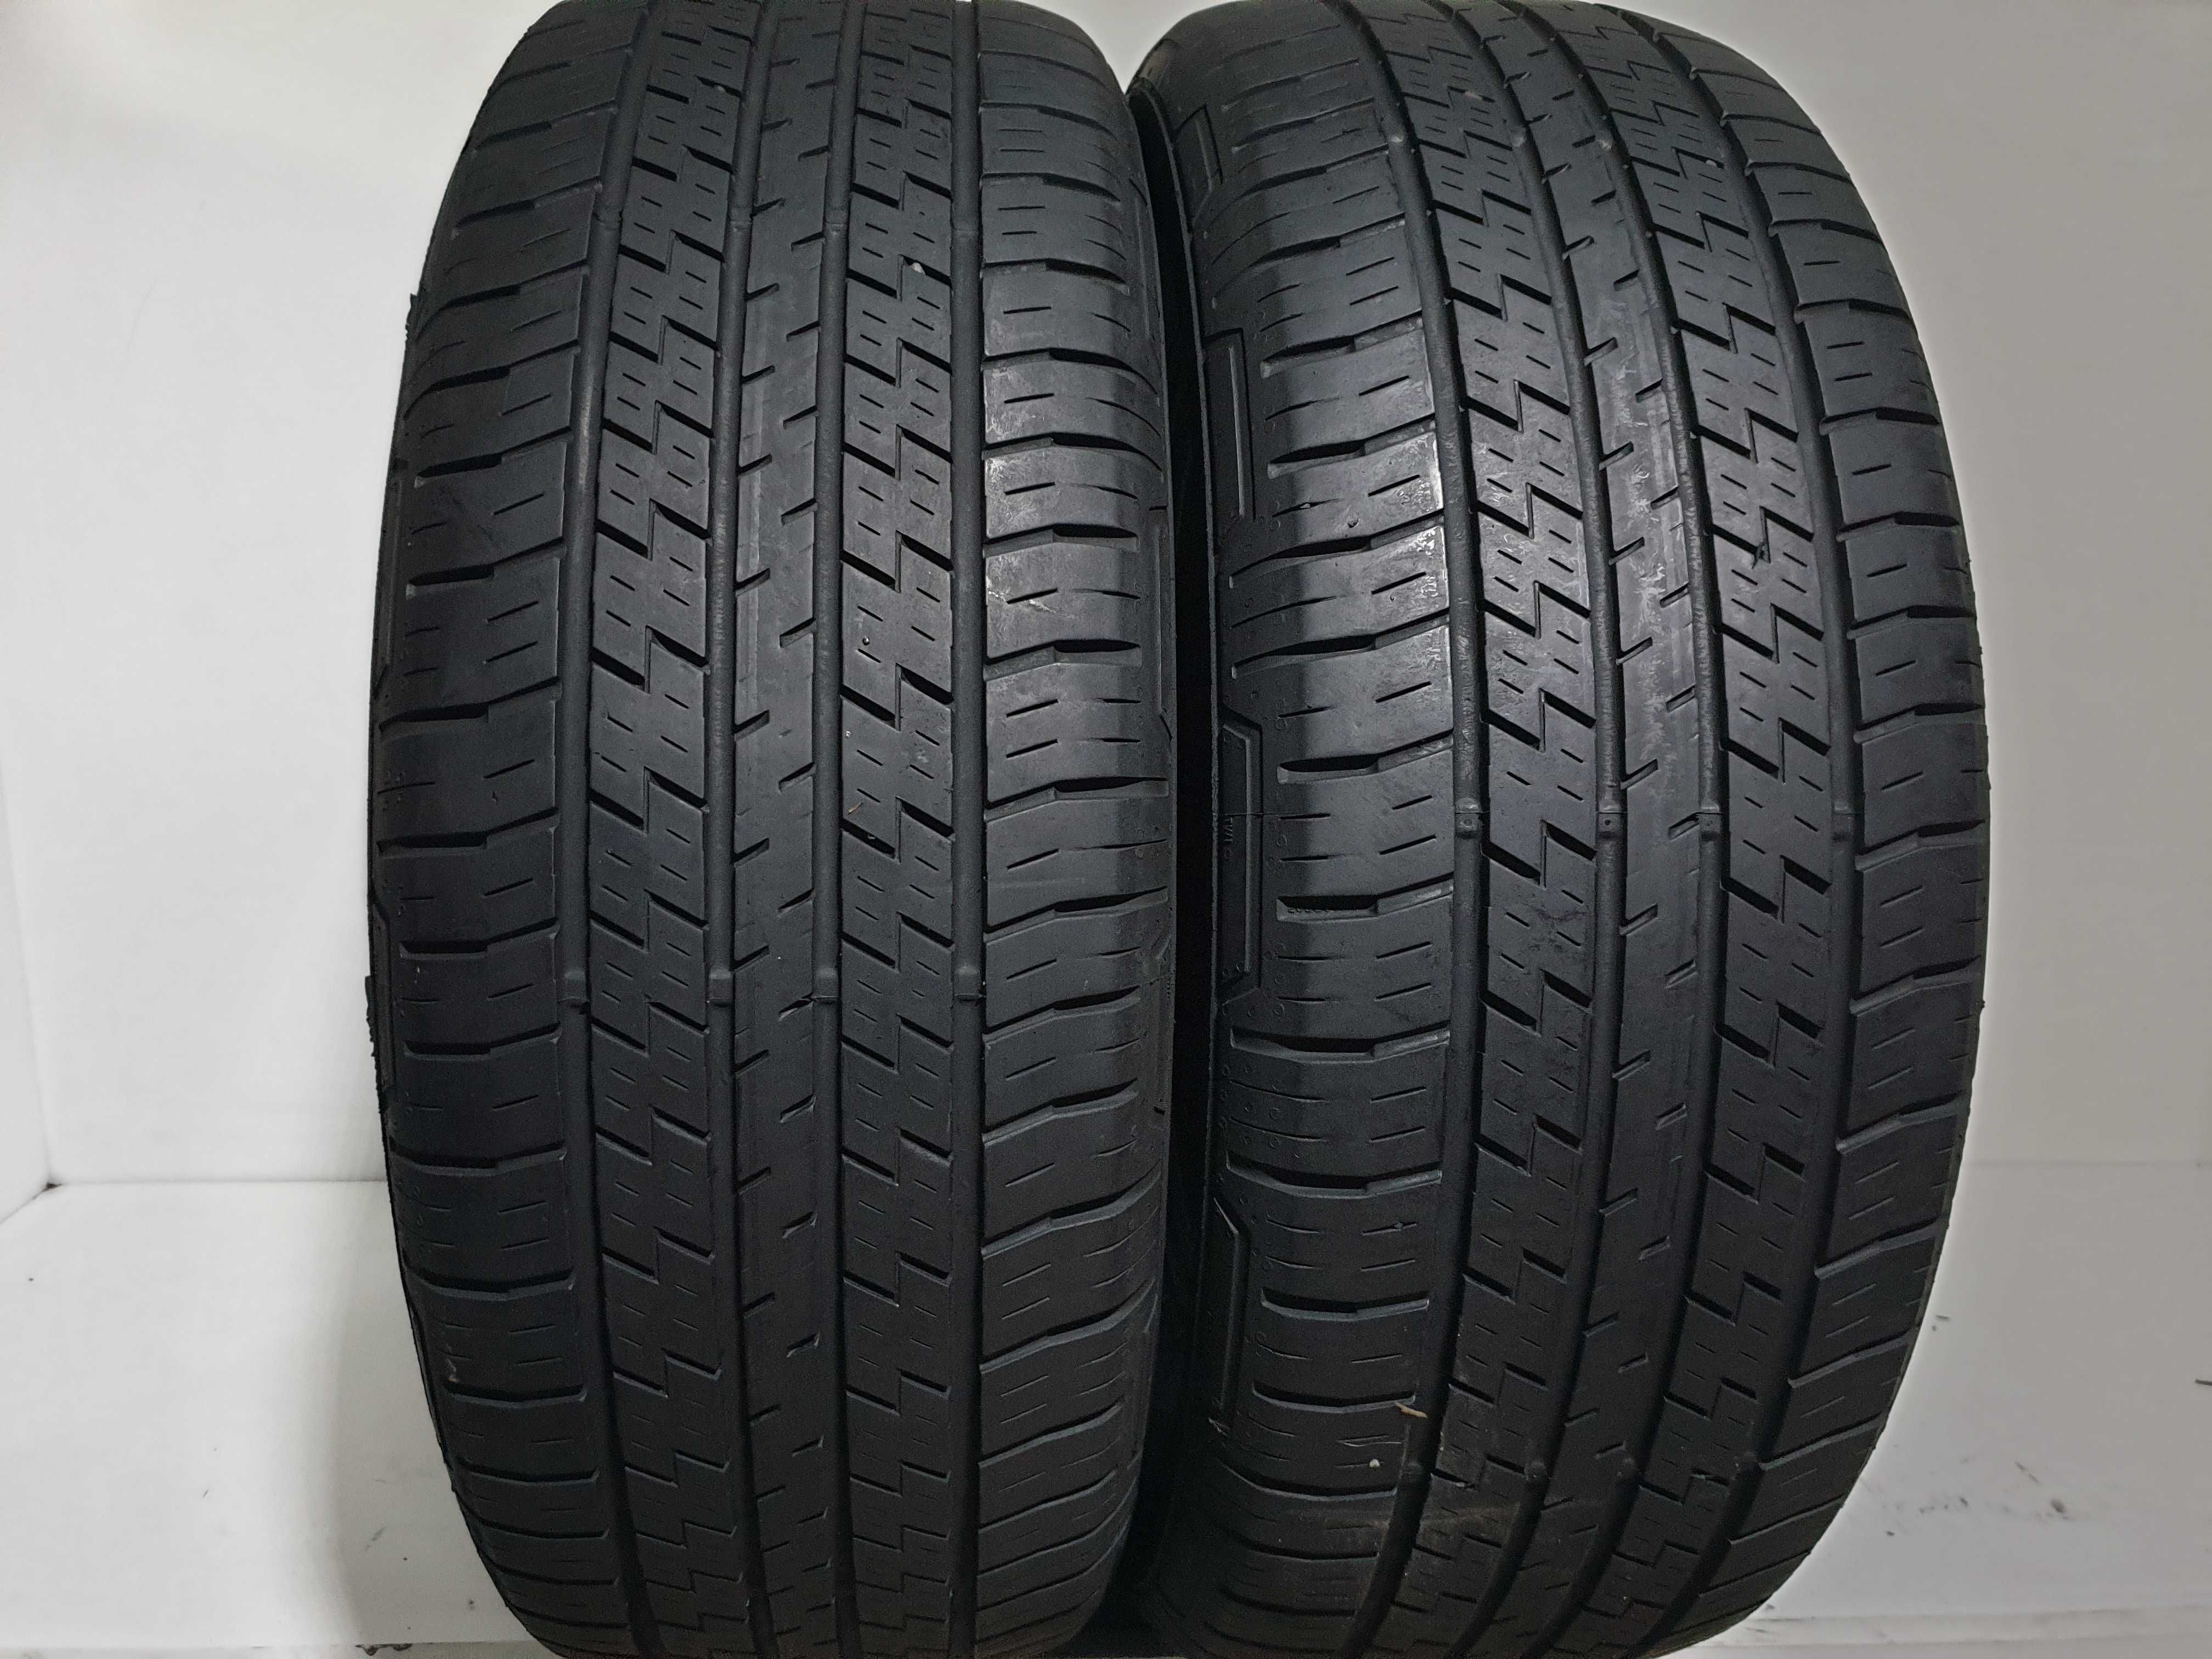 Anvelope Second Hand Continental Vara-235/60 R17 102V,in stoc R16/18